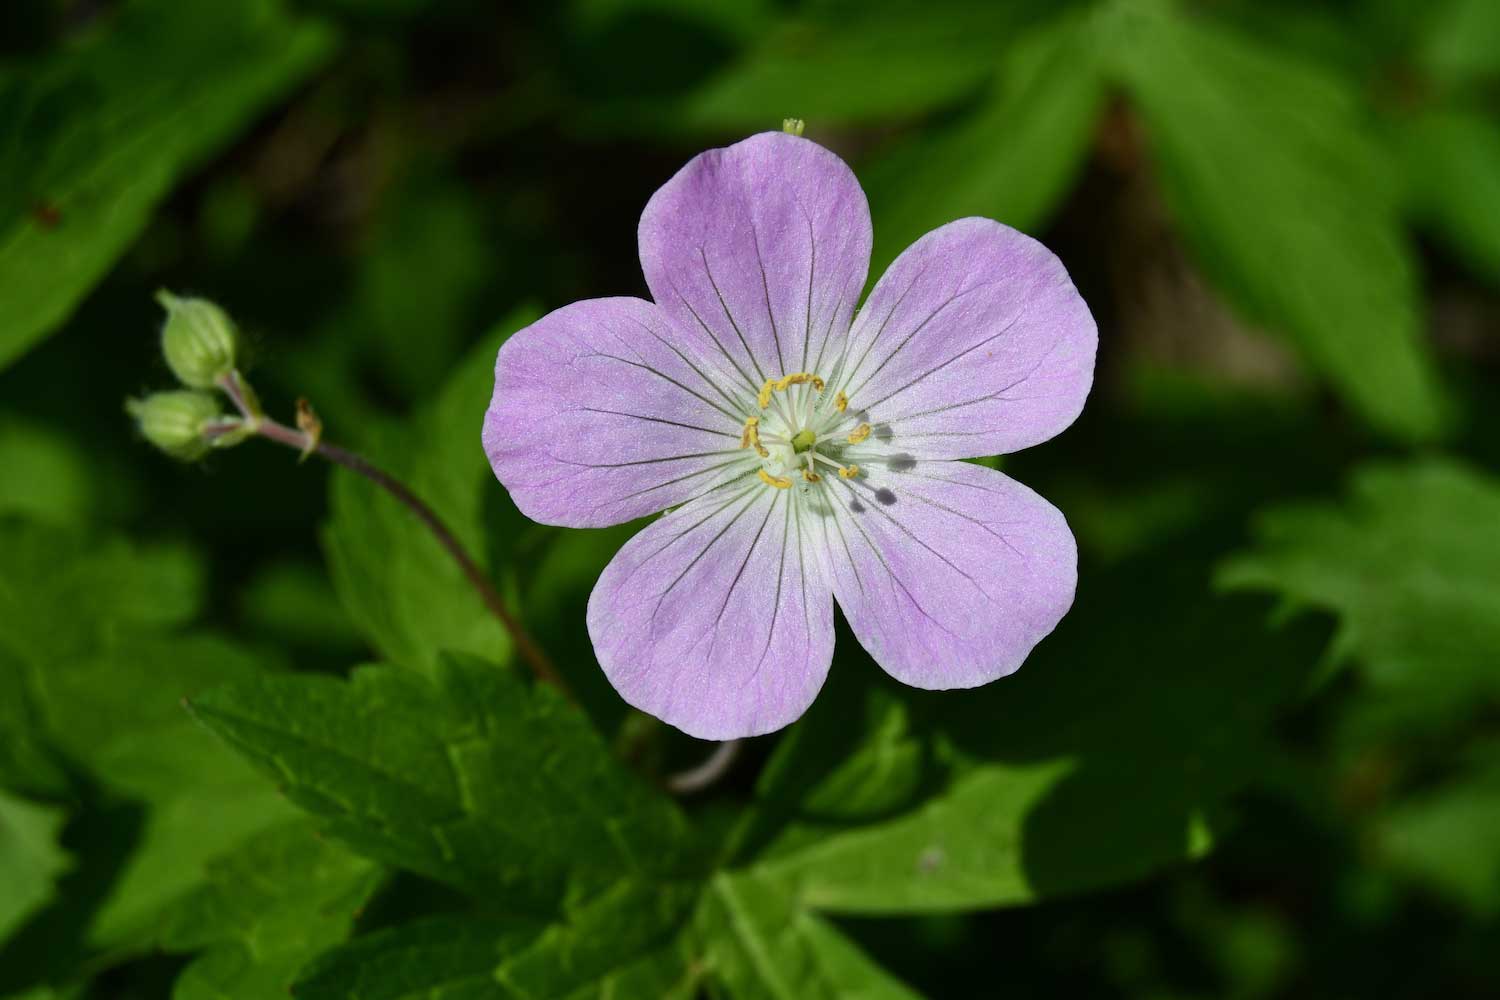 A light purple wild geranium bloom surrounded by green leaves and vegetation.